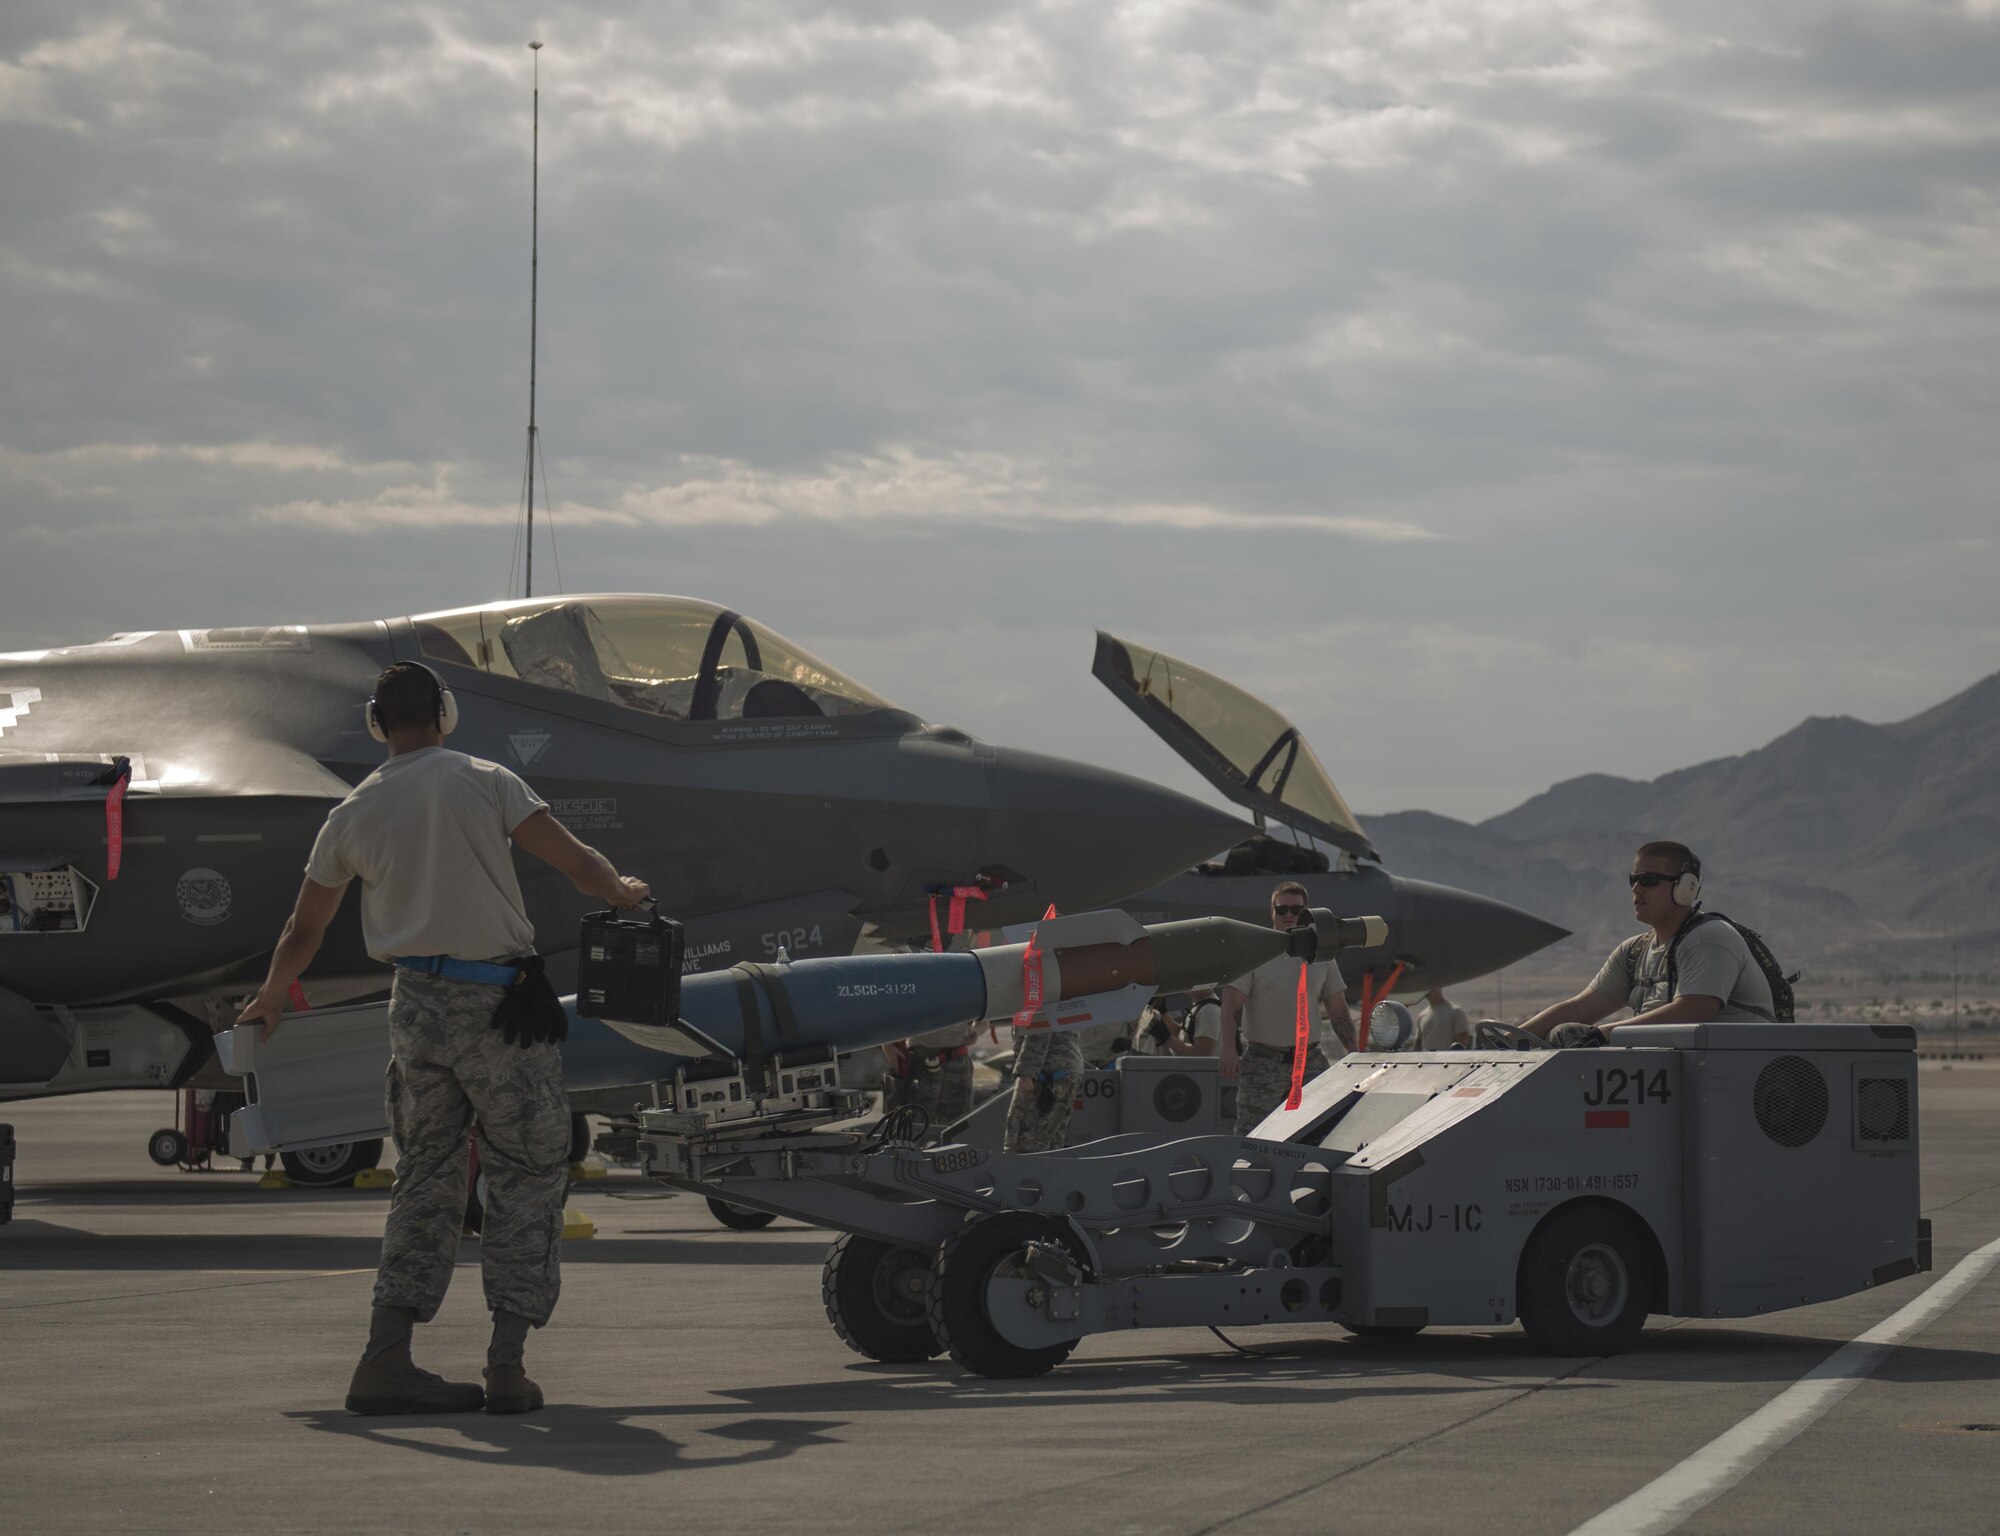 U.S. Air Force Staff Sgt. Jeremy Mckague, left, and Senior Airman Blake Baker, both 33rd Aircraft Maintenance Squadron weapons load crew members, prepare a GBU-12 to be loaded on an F-35A Lightning II July 18, at Nellis Air Force Base, Nev. The 33rd Fighter Wing and Marine Attack Squadron 221 from Yuma, Ariz., participated in the first combat exercise with Air Force F-35As and Marine Corps F-35Bs operating simultaneously during Red Flag 17-3. The large scale exercise, which was developed to provide pilots with critical experience in combat situations, enabled F-35 pilots to plan and train using the same tactics, techniques and procedures. (U.S. Air Force photo by Staff Sgt. Peter Thompson)